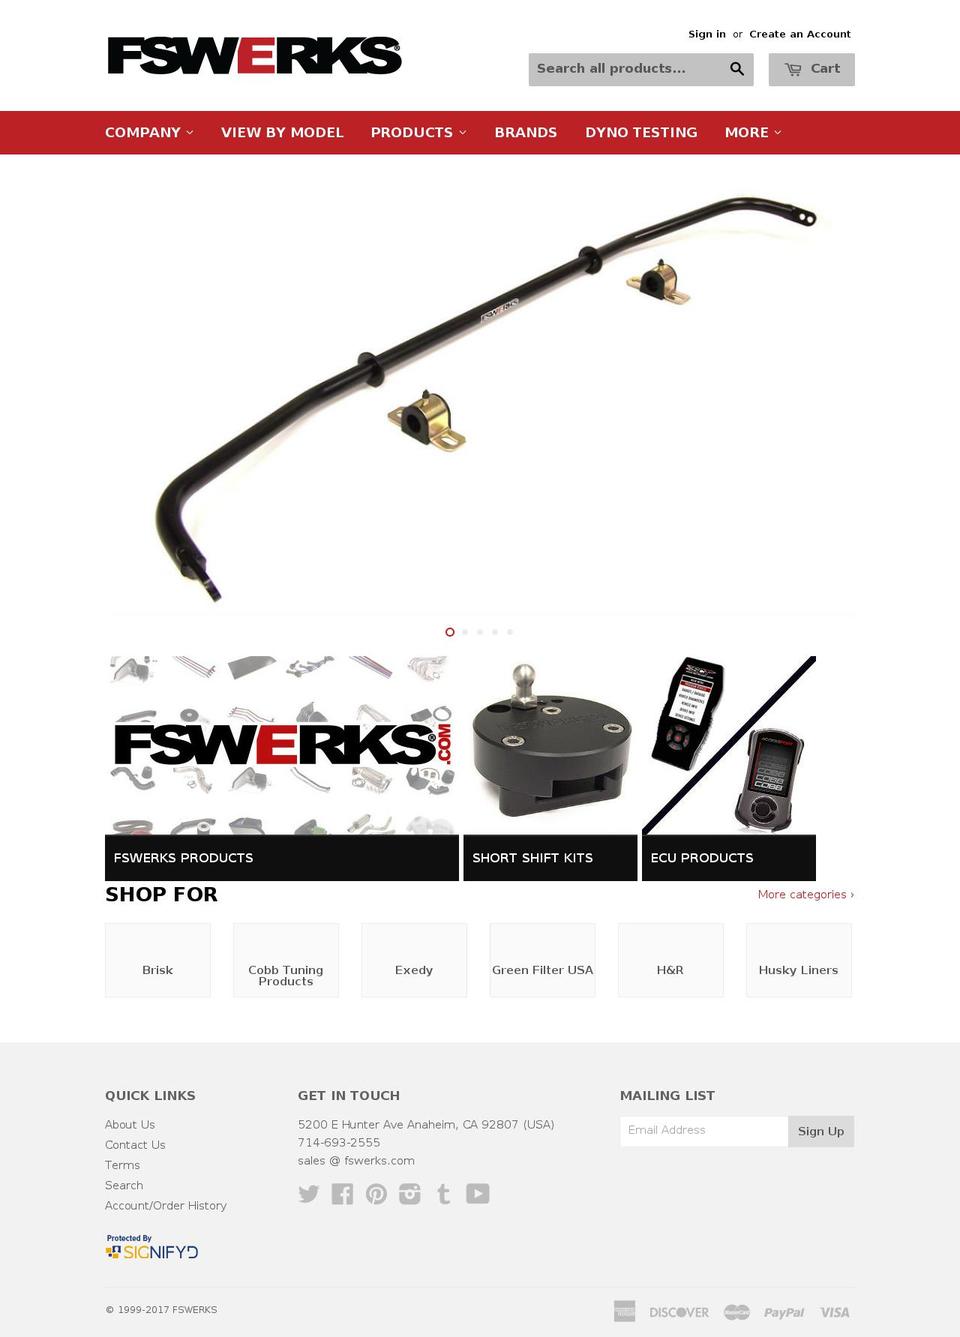 Supply Shopify theme site example fswerks.com